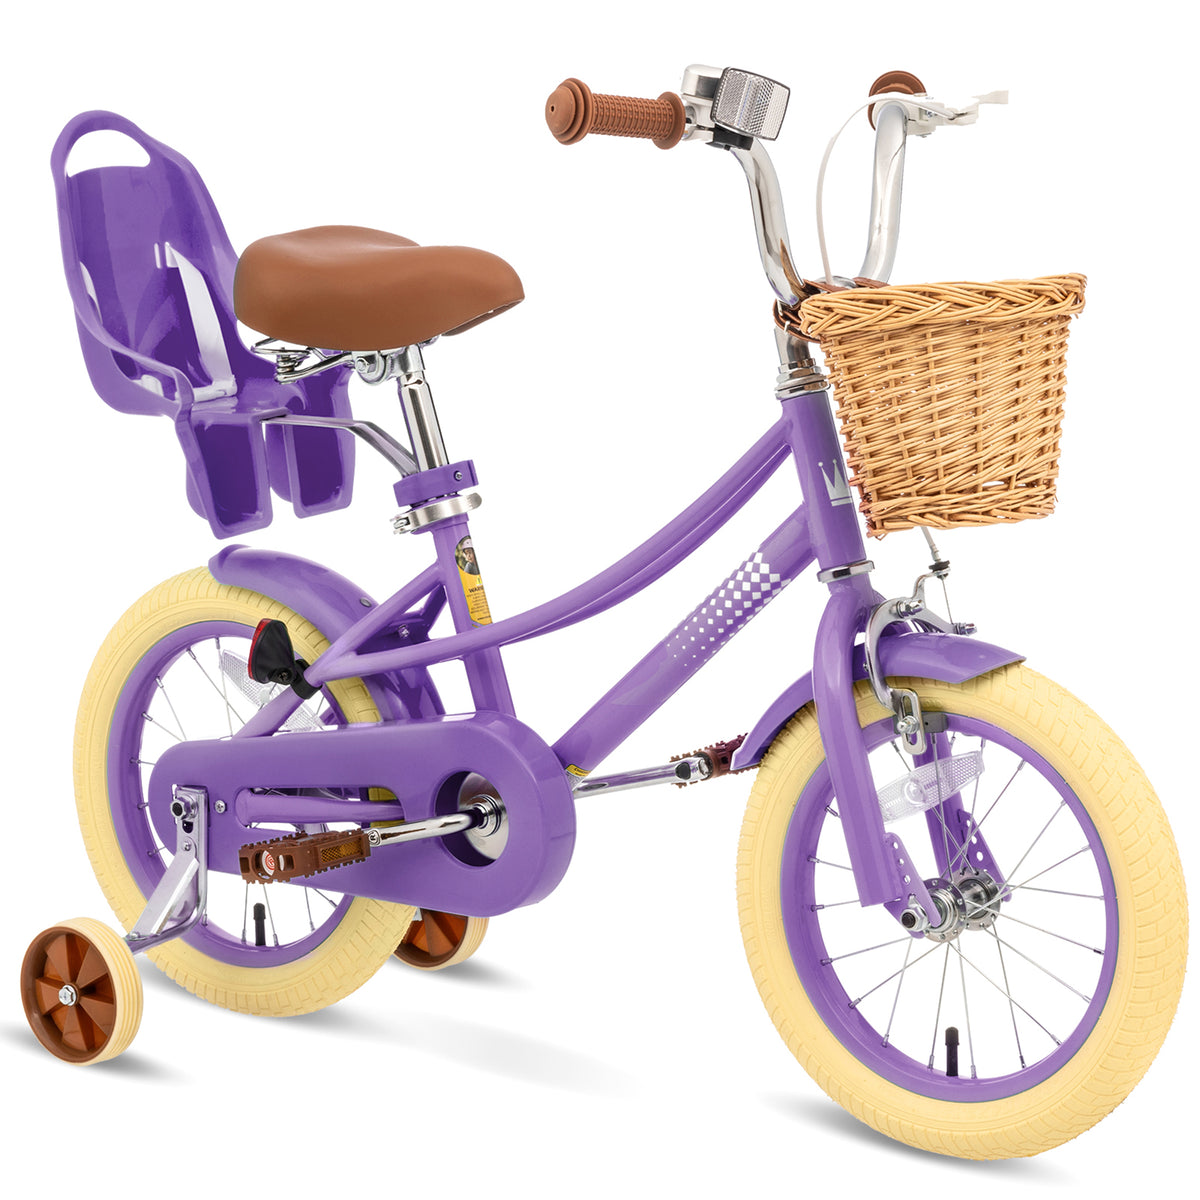 XJD Kids Bicycle for Toddlers and Children 2-12 Years Old, 12 14 16 20 inch Bike for Girls and Boys, with Basket and Bell Training Wheels, Adjustable Seat Handlebar Height, Purple